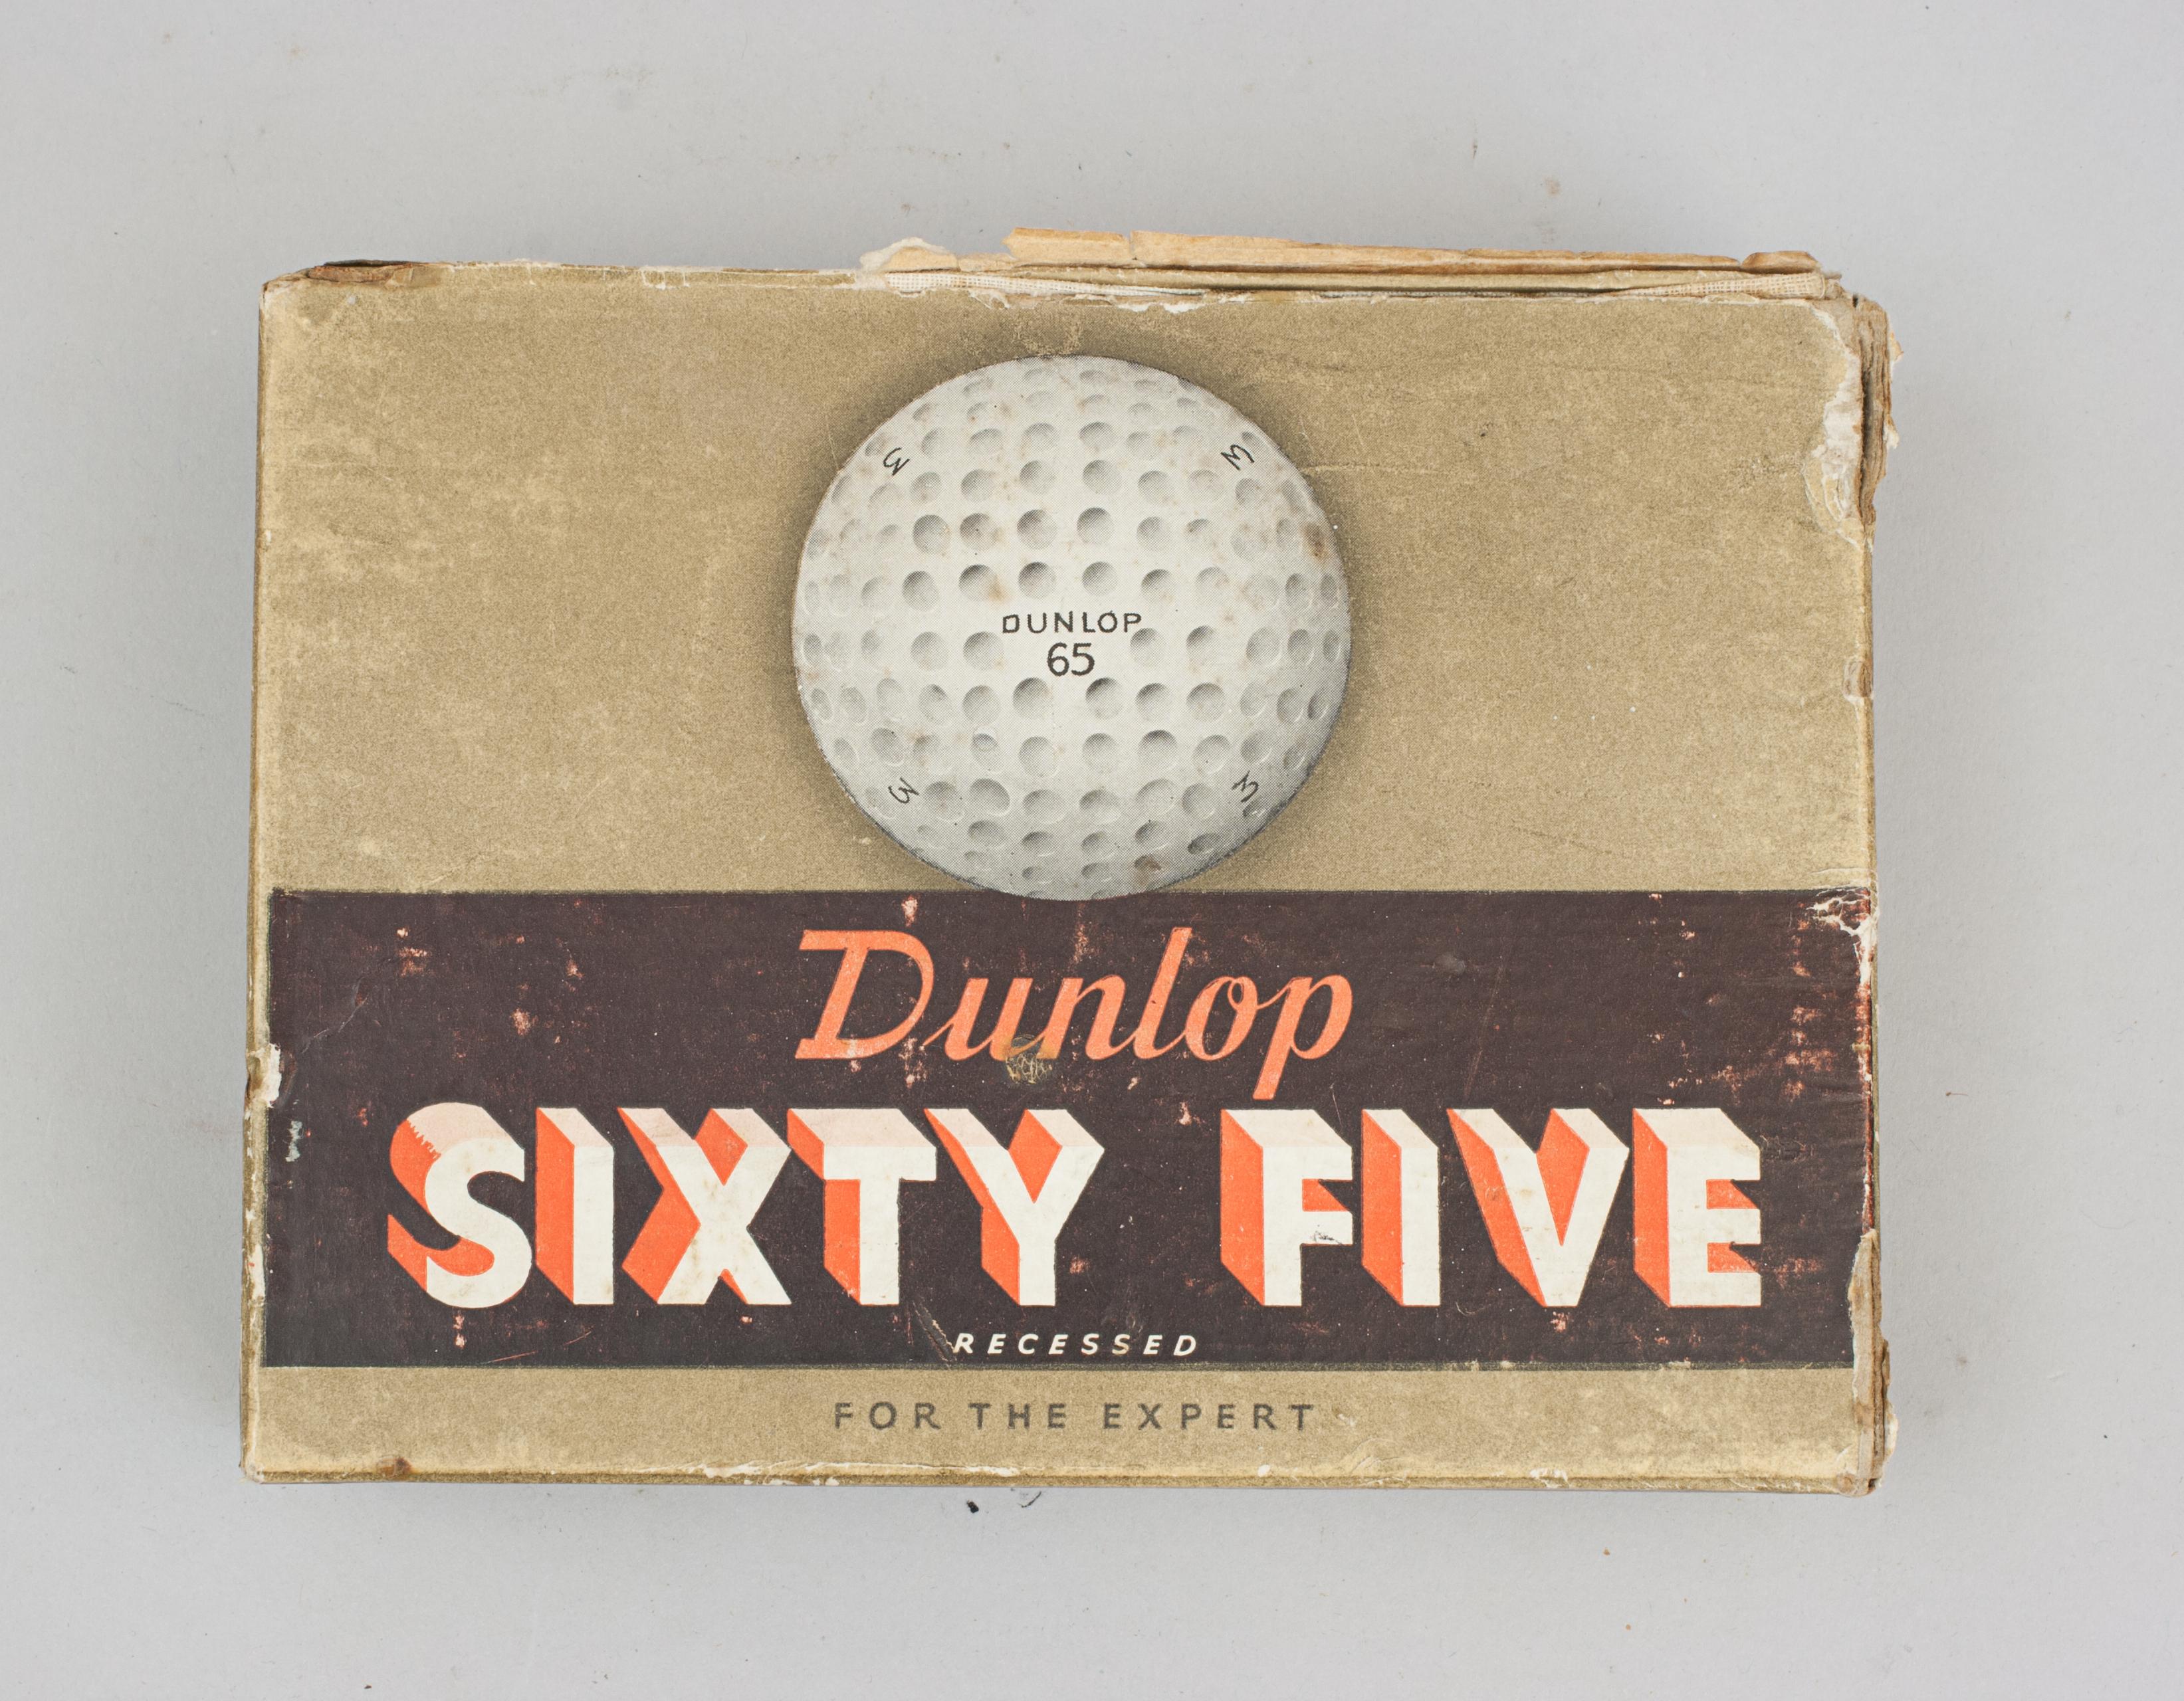 British Collection of 12 Original Golf Ball Boxes. Silver King, North Berwick etc. For Sale